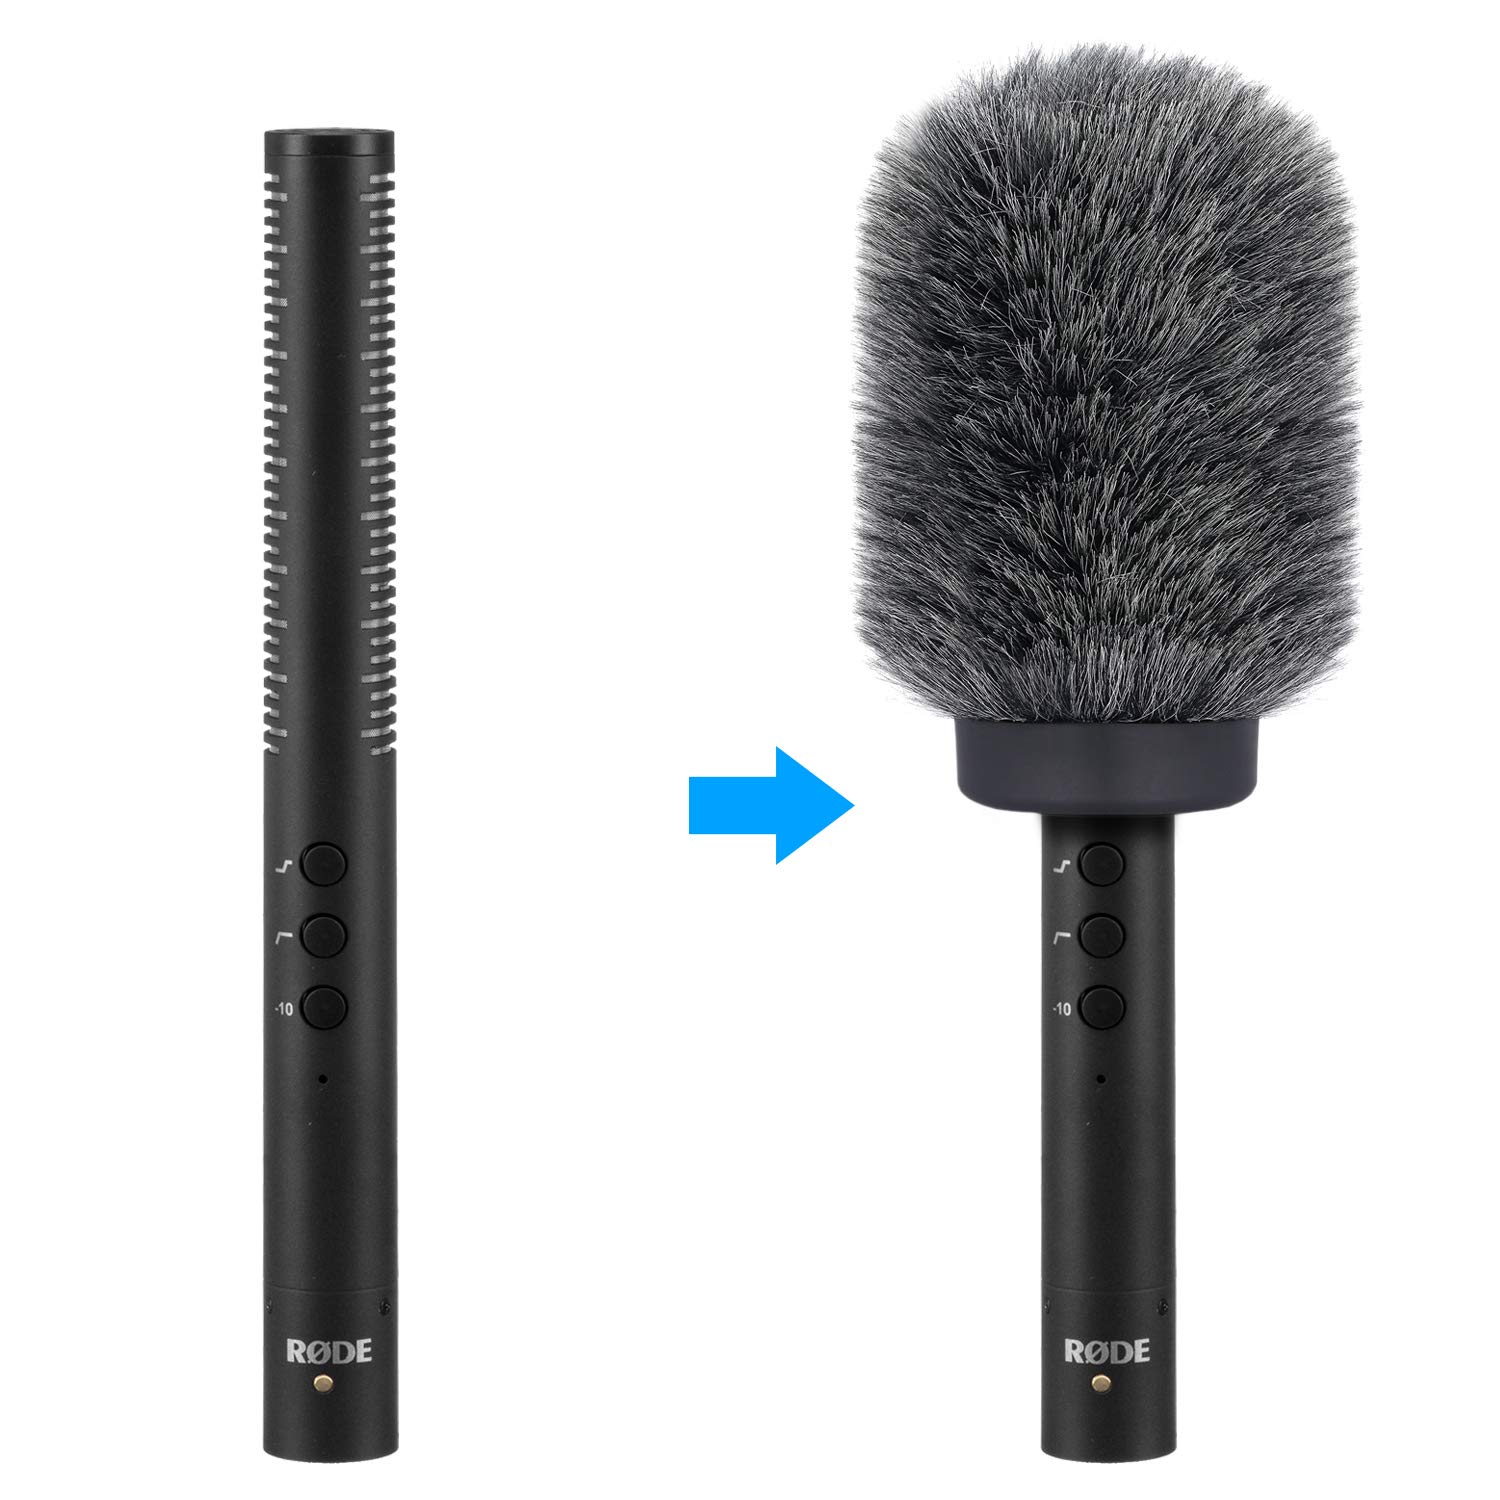 YOUSHARES Deadcat Wind Muff for Rode NTG4,MKE 600 Shotgun Microphones, Audio-Technica AT875R Shotgun Microphones, Windscreen Up to 4.7" Long